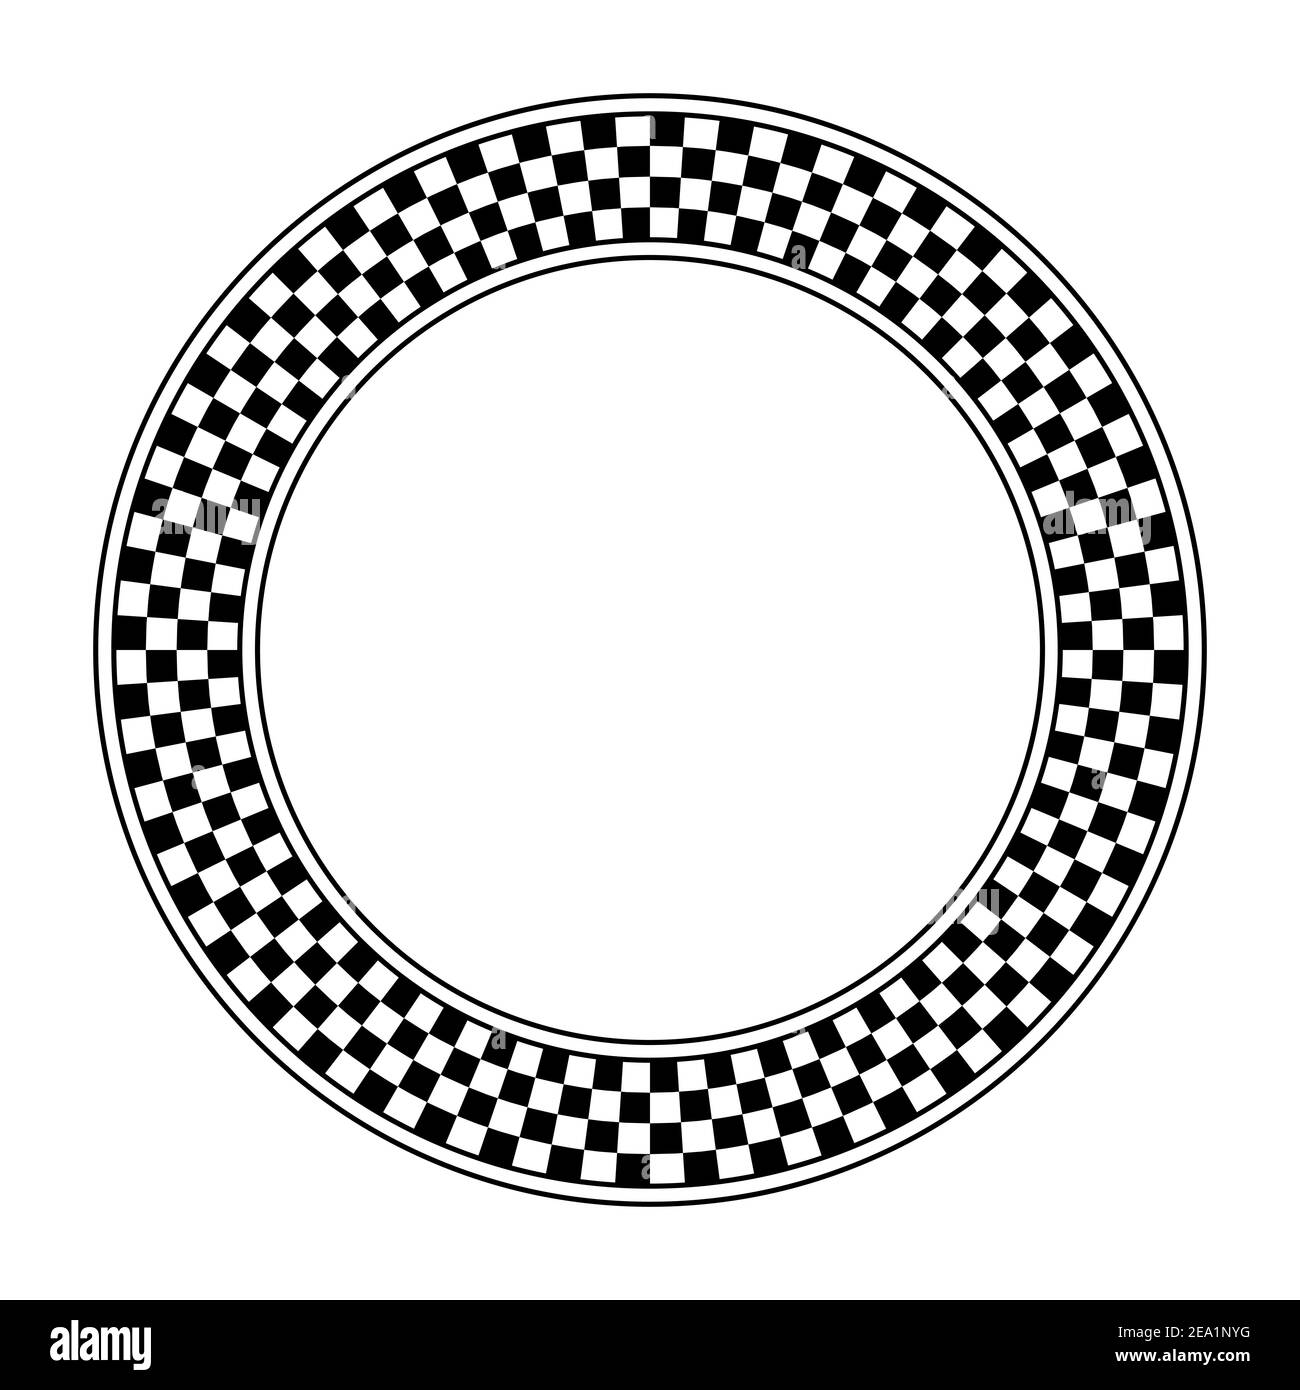 Checkerboard pattern, circle frame. Round checkered pattern frame, made of a checkerboard diagram consisting of black and white alternating squares. Stock Photo